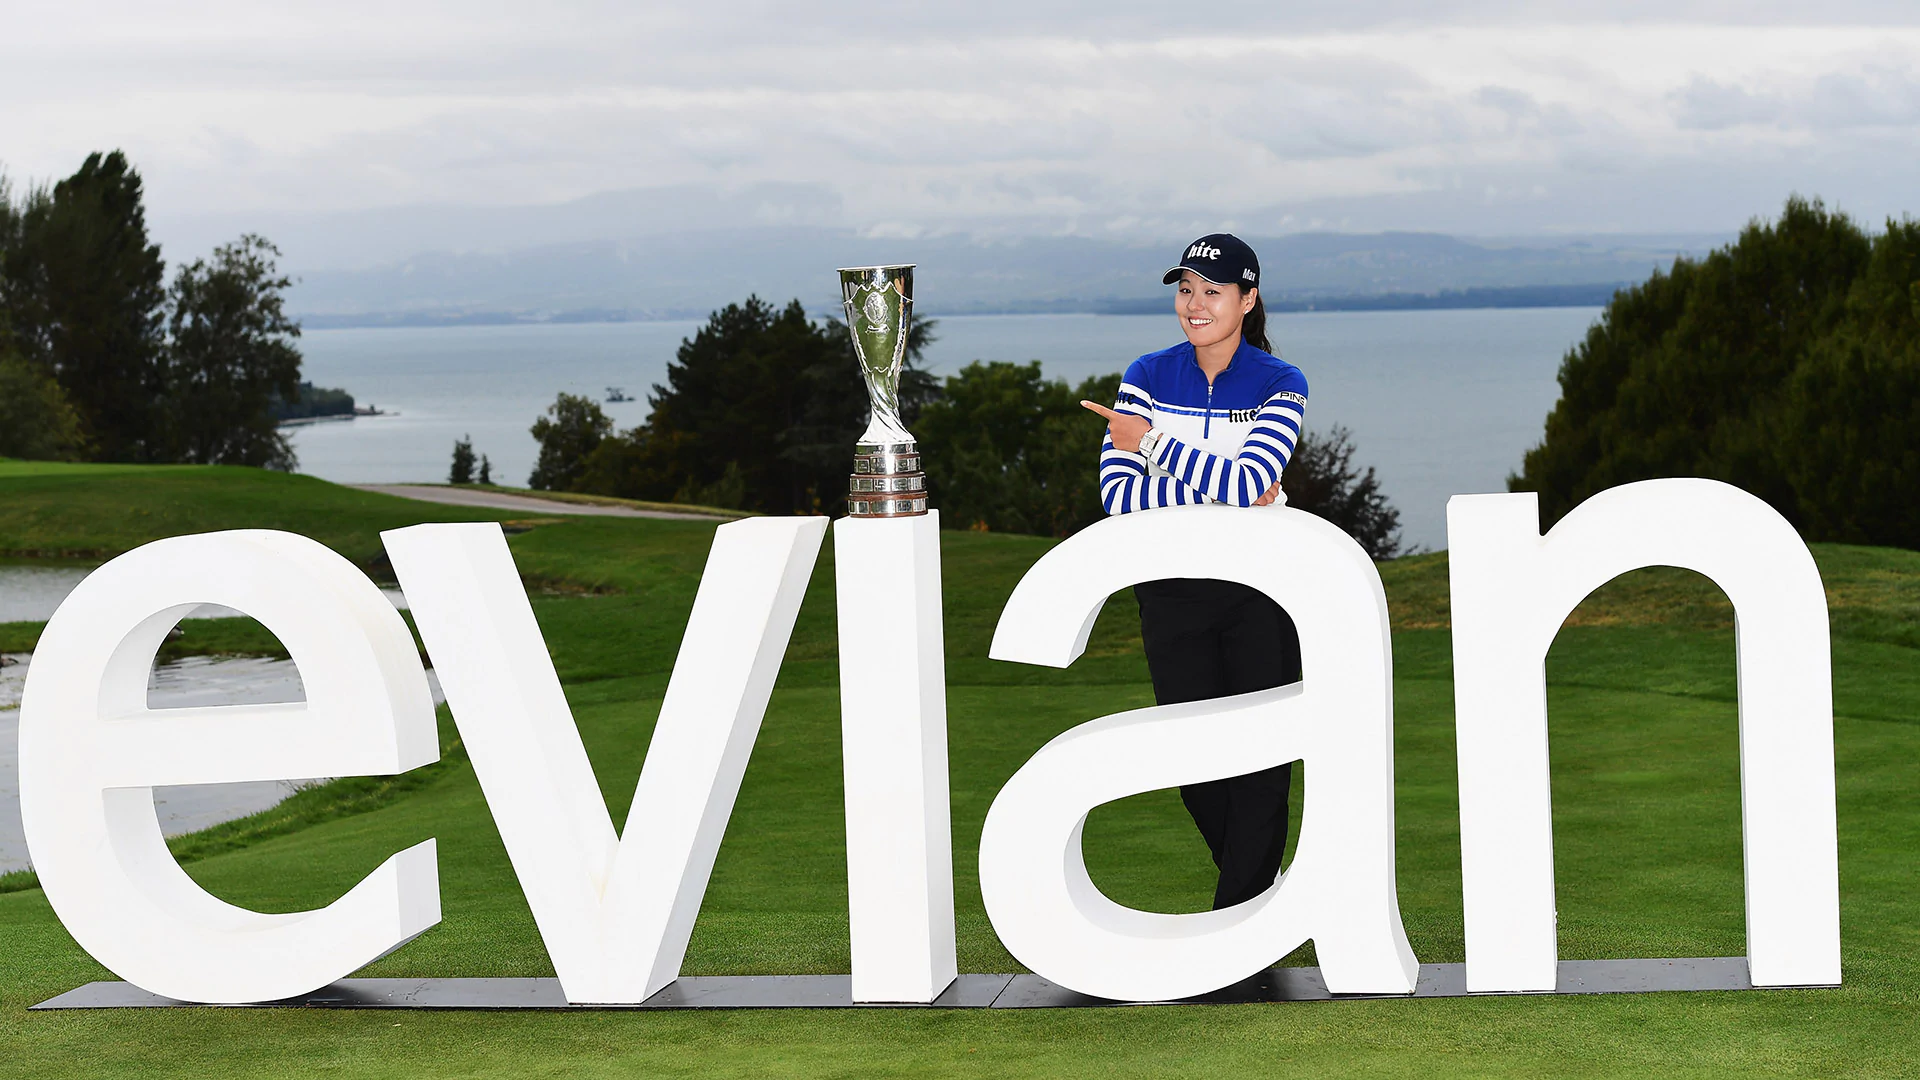 Evian purse increase ($3.65 mil) makes it LPGA's 2nd largest